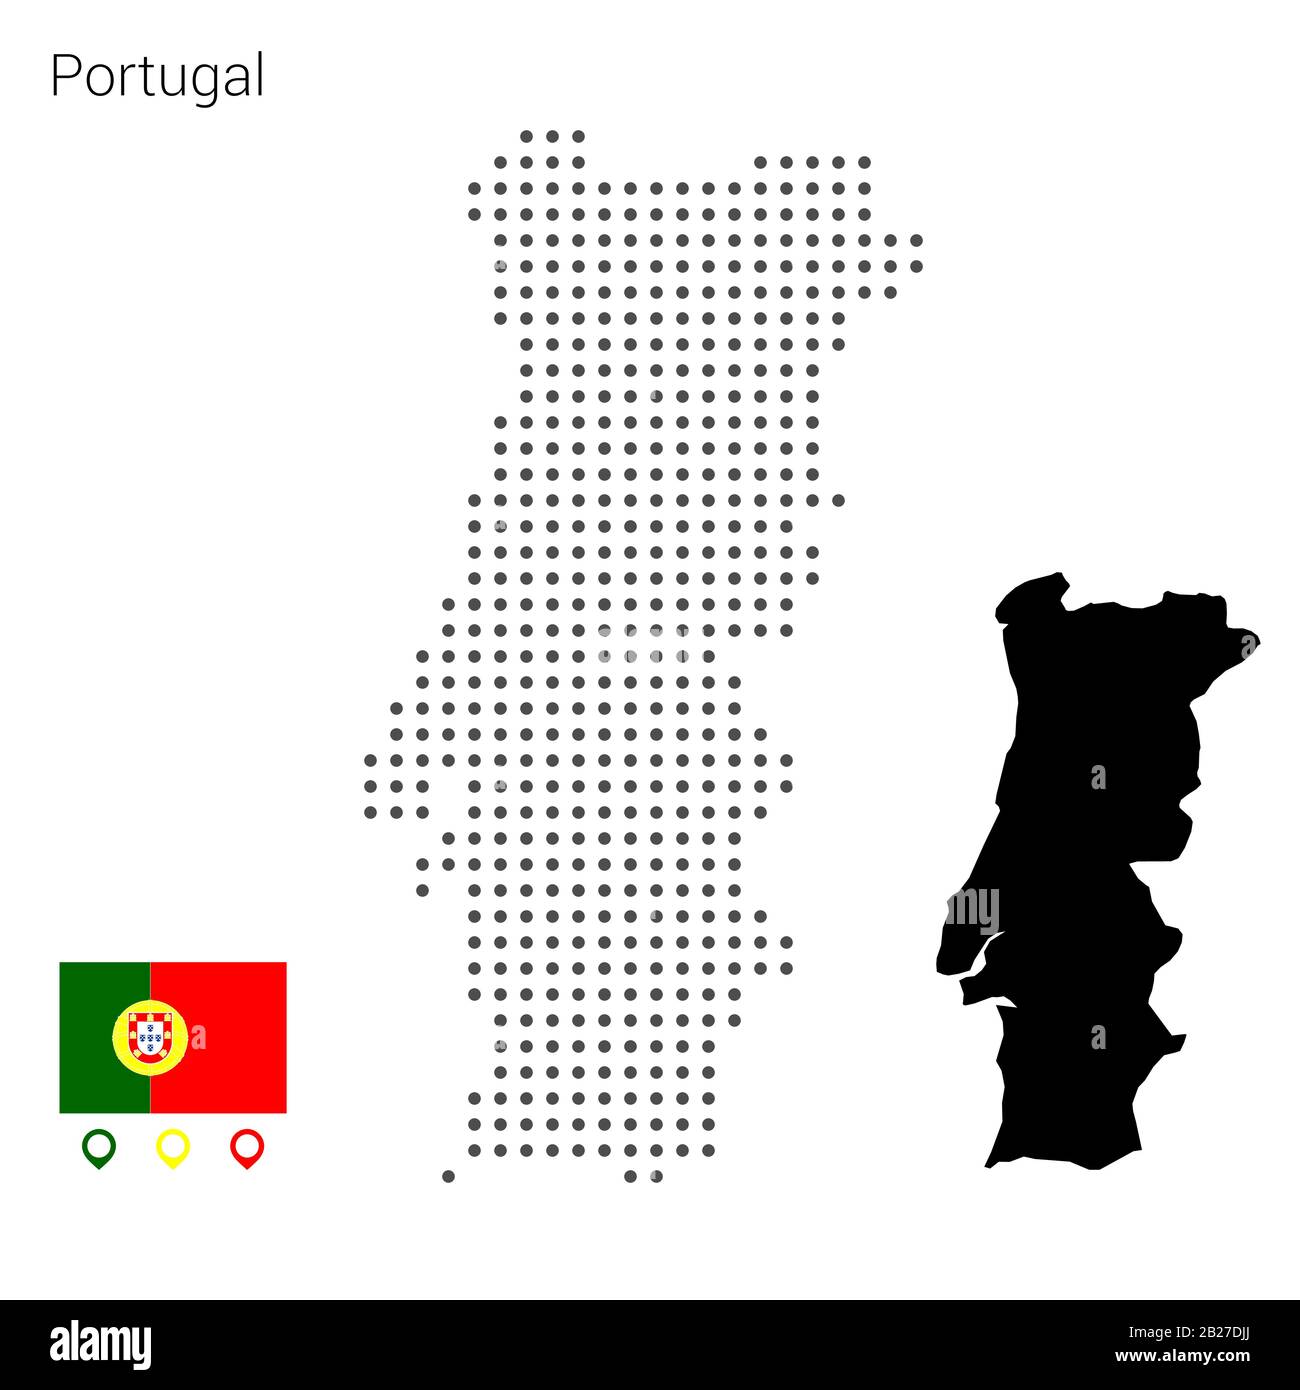 Map of portugal Royalty Free Vector Image - VectorStock